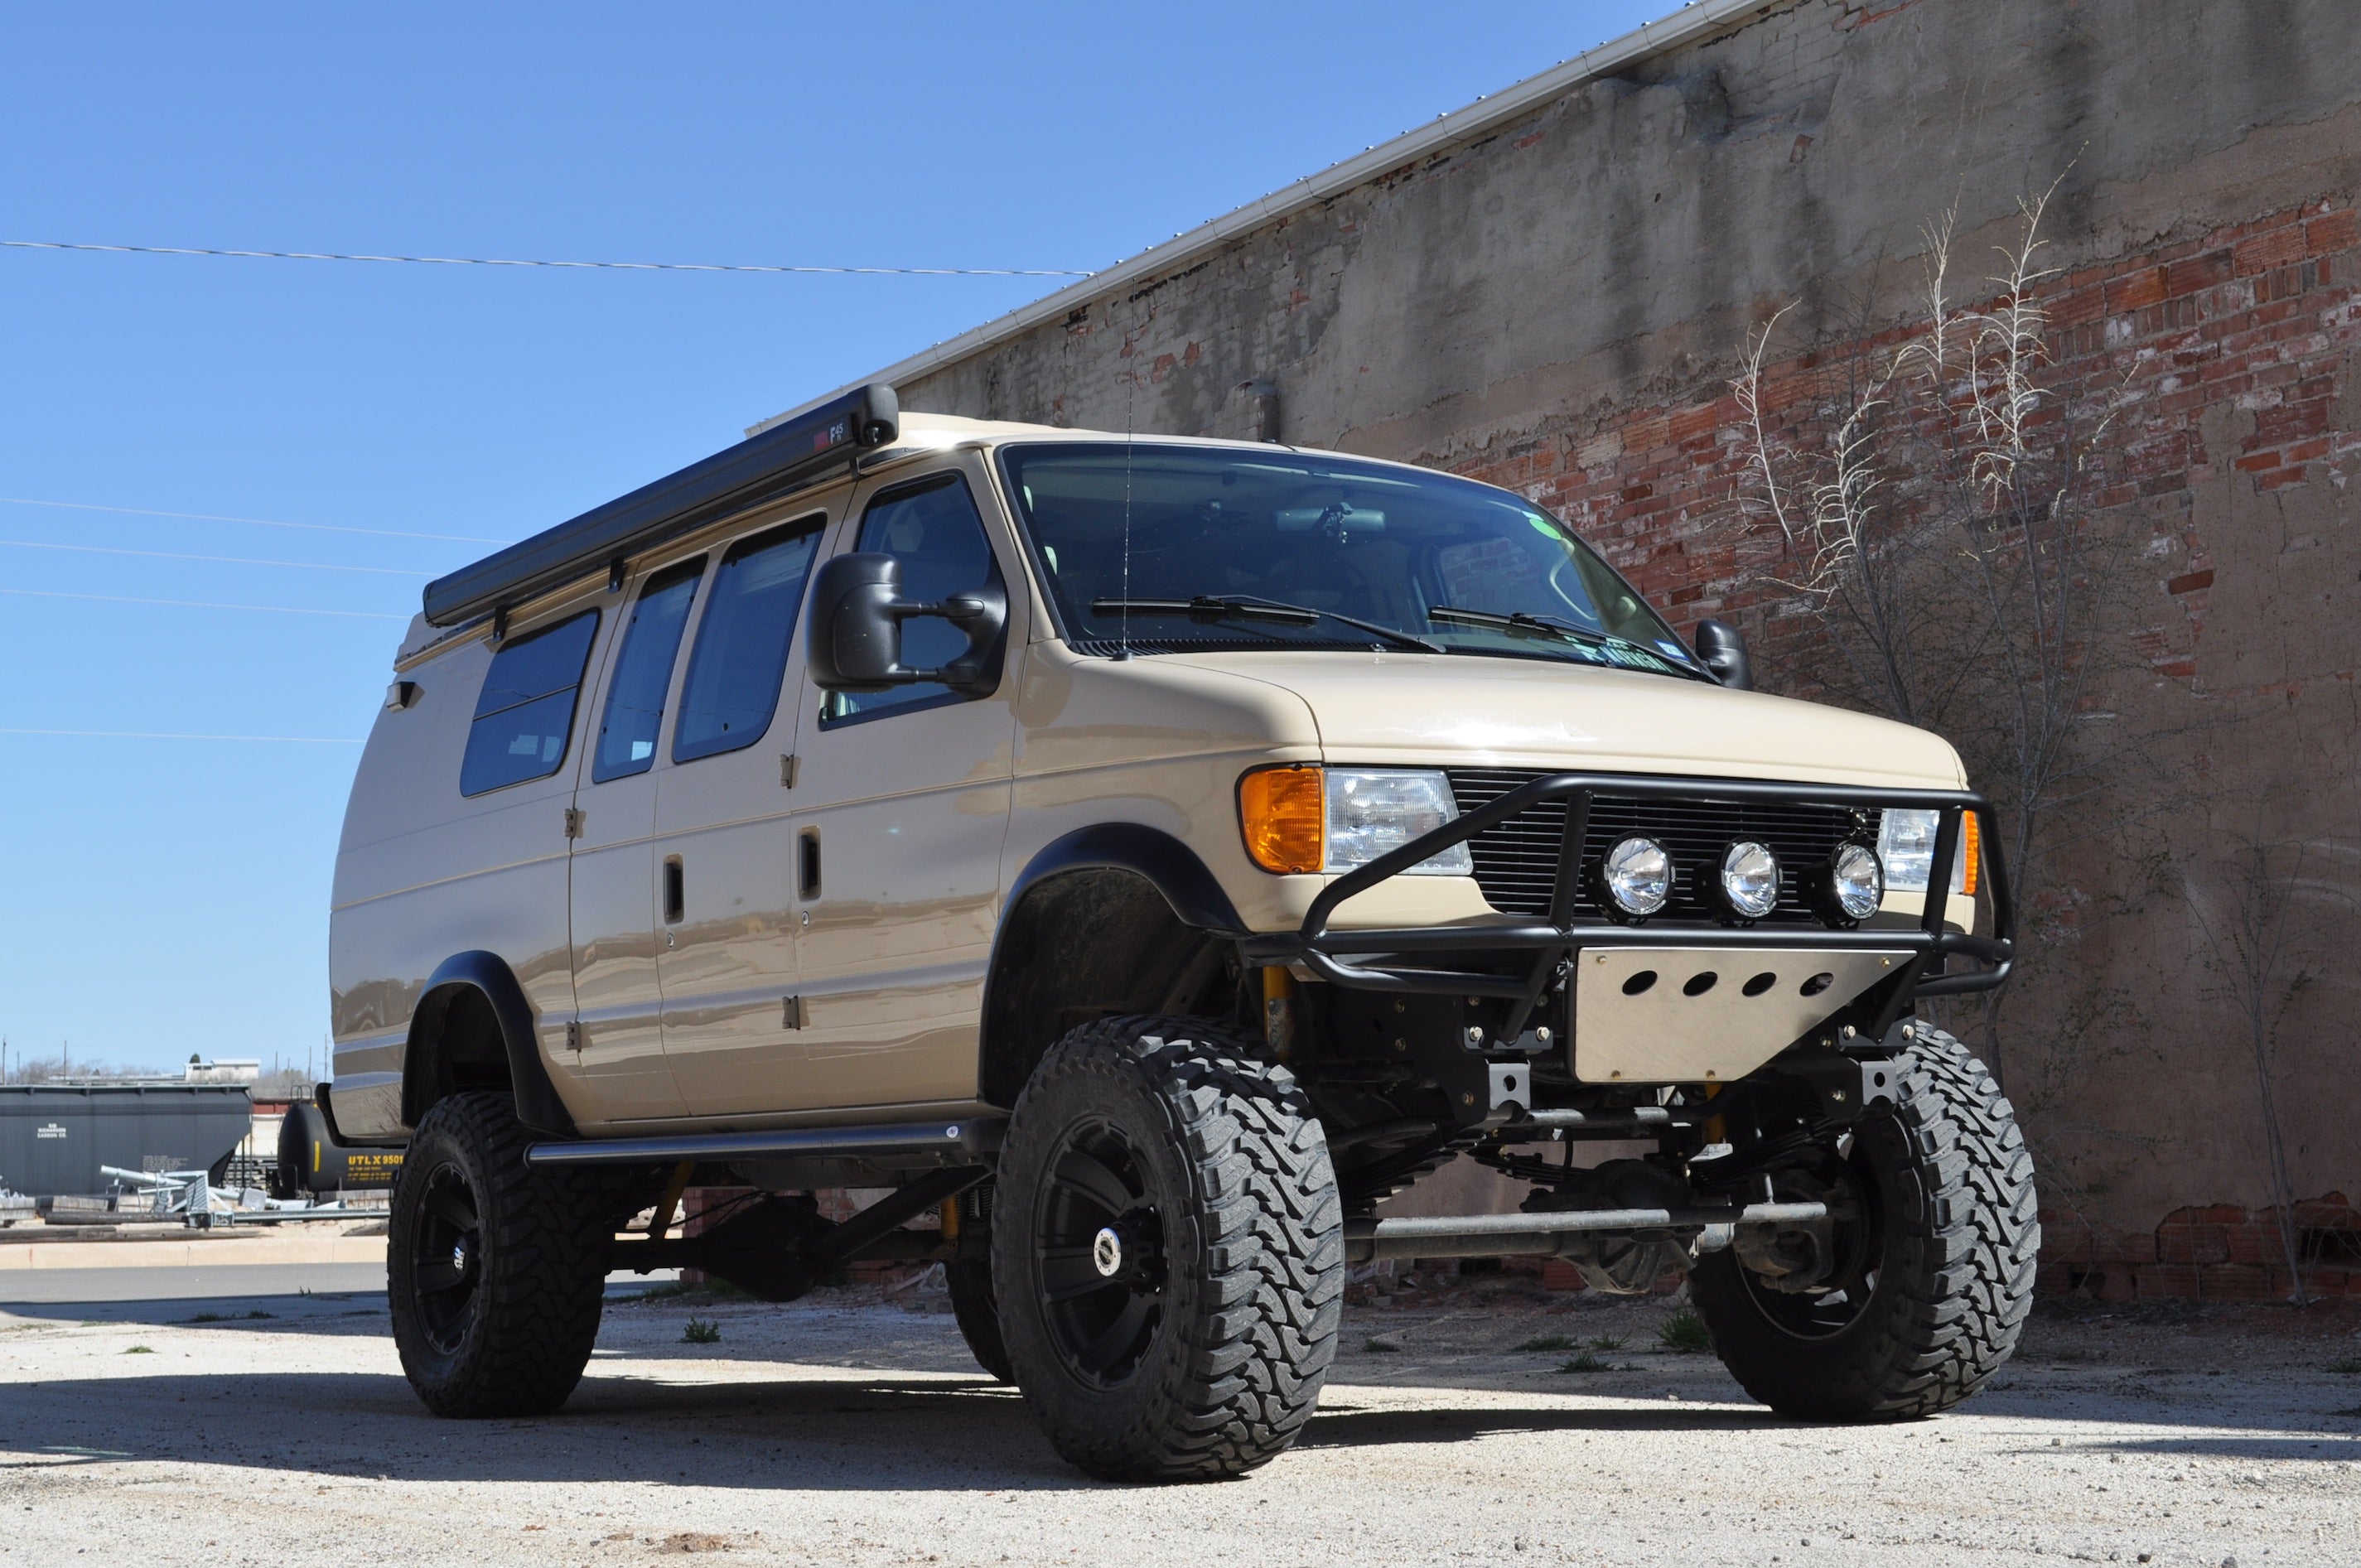 Sportsmobile 4×4 Vans Are All The Rage In Adventure Travel